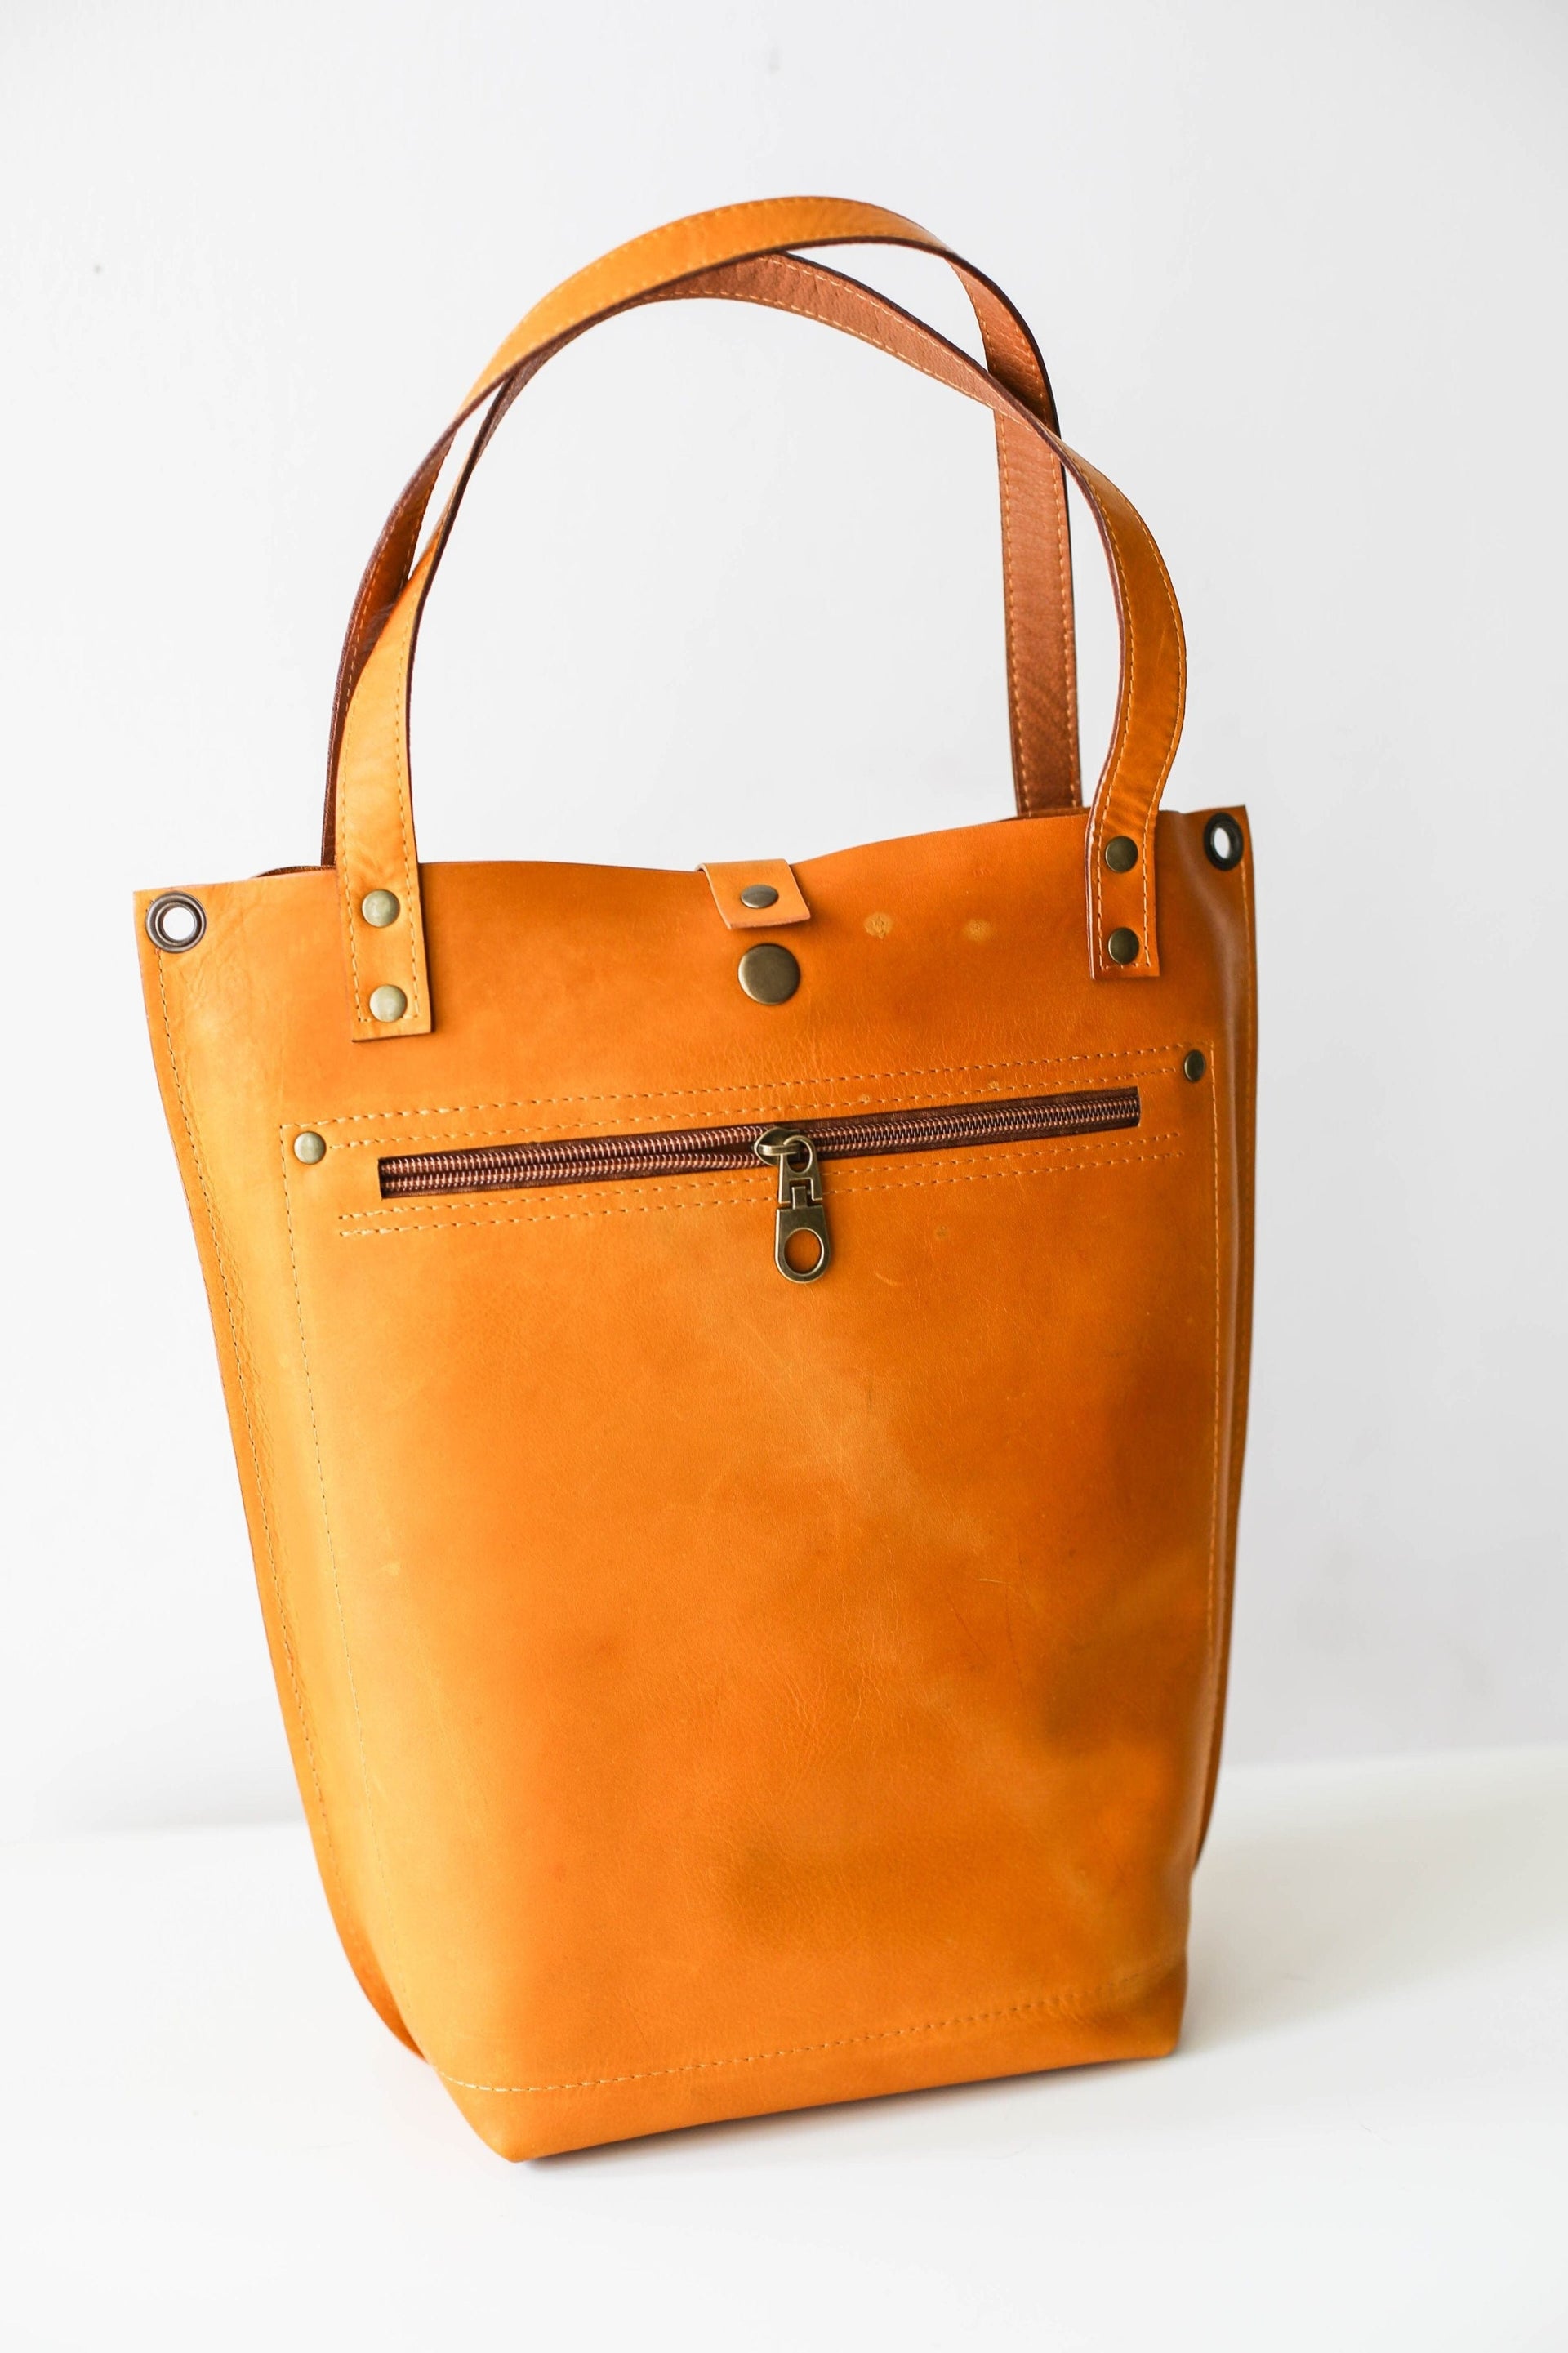 leather tote with zipper pocket